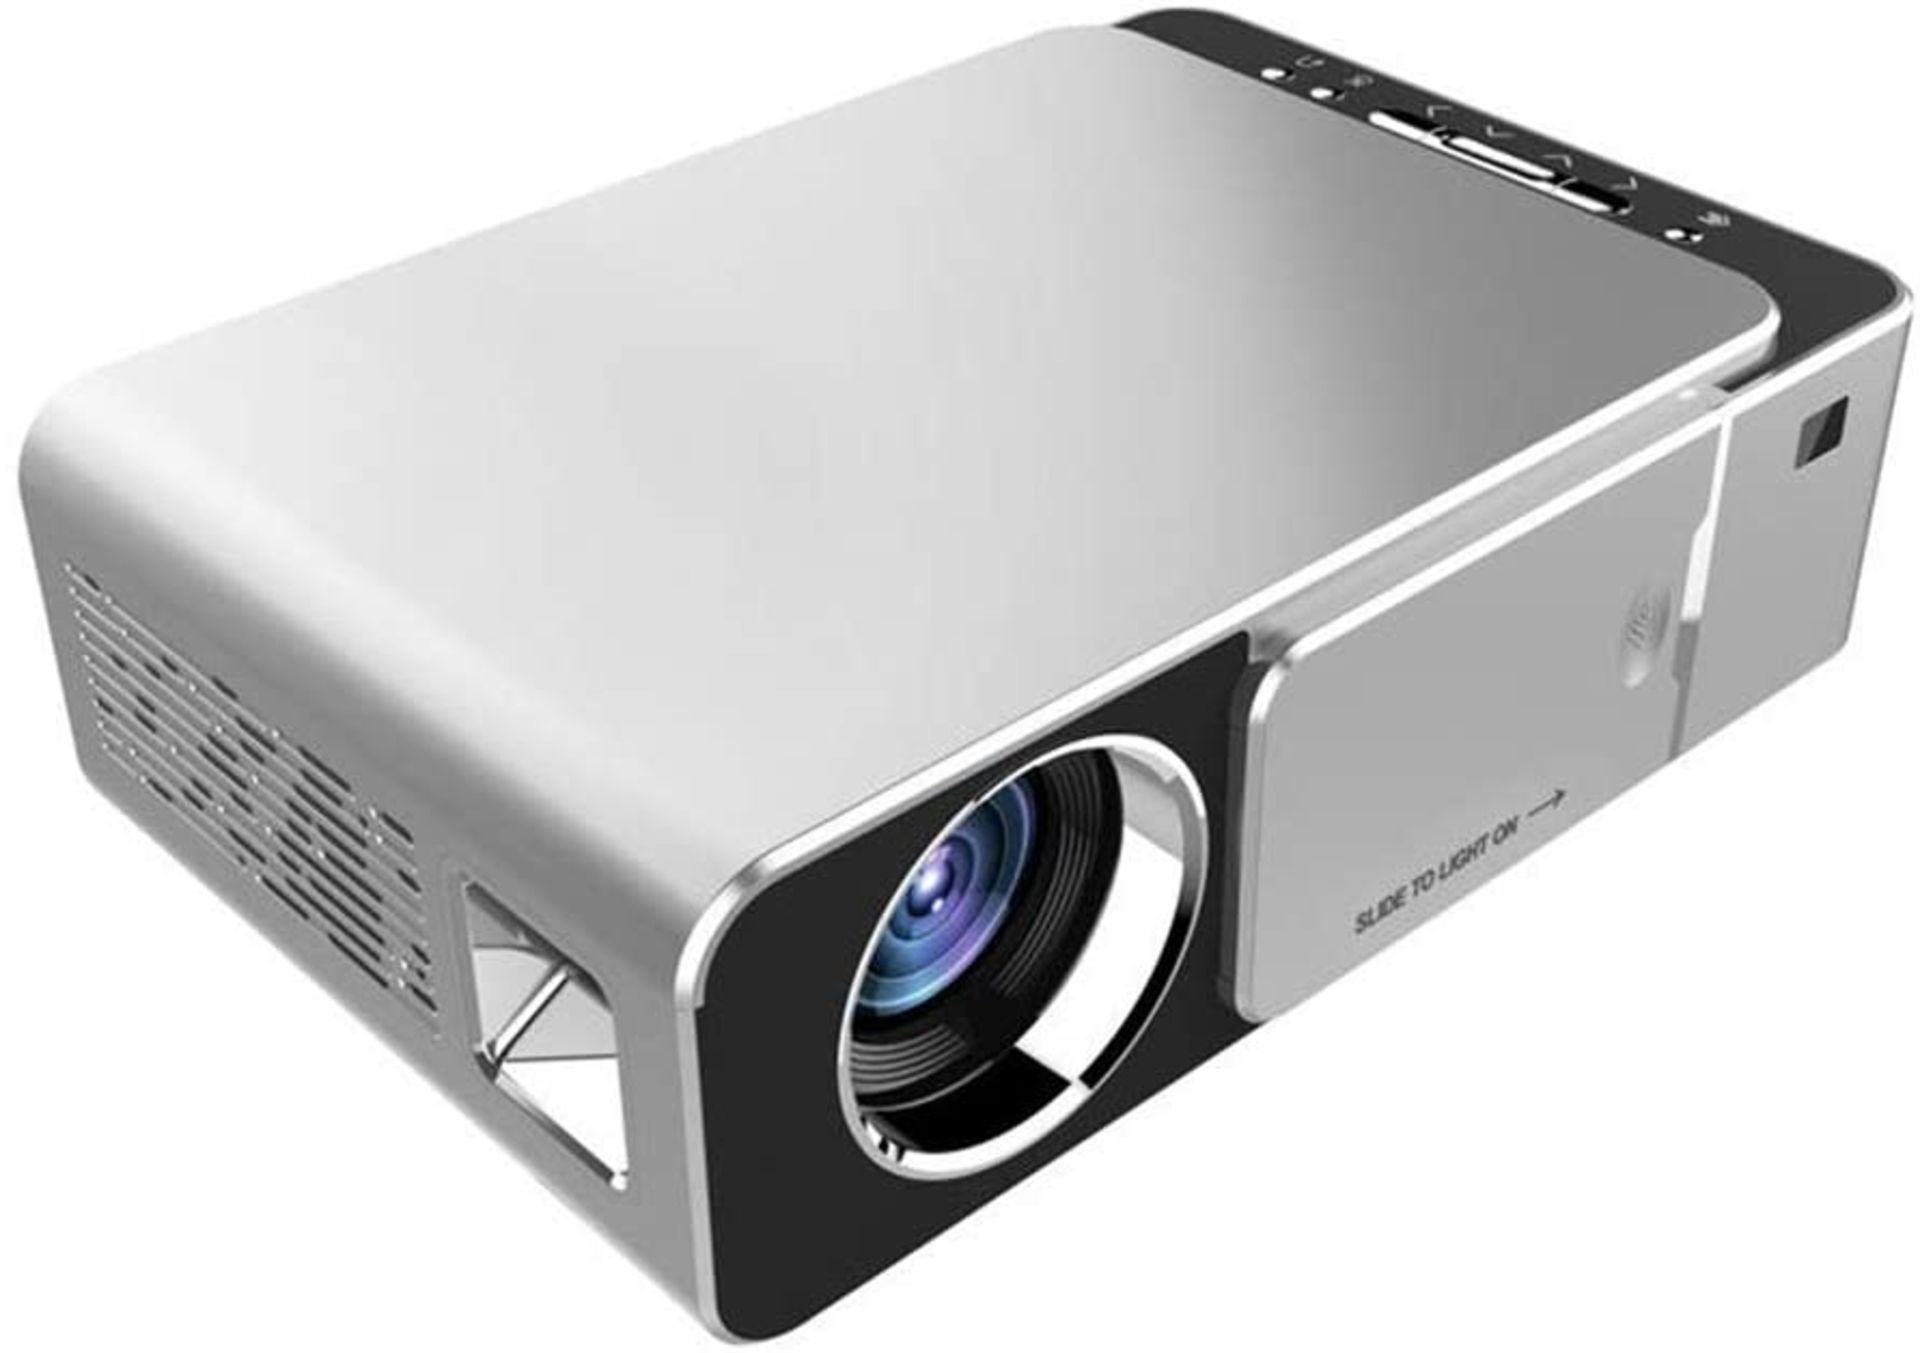 Rrp £140 Oipoodde Projector Lcd Projector 1280 X 720P Hd 3500 Lumens Led Multimedia Home Theater Vid - Image 3 of 4